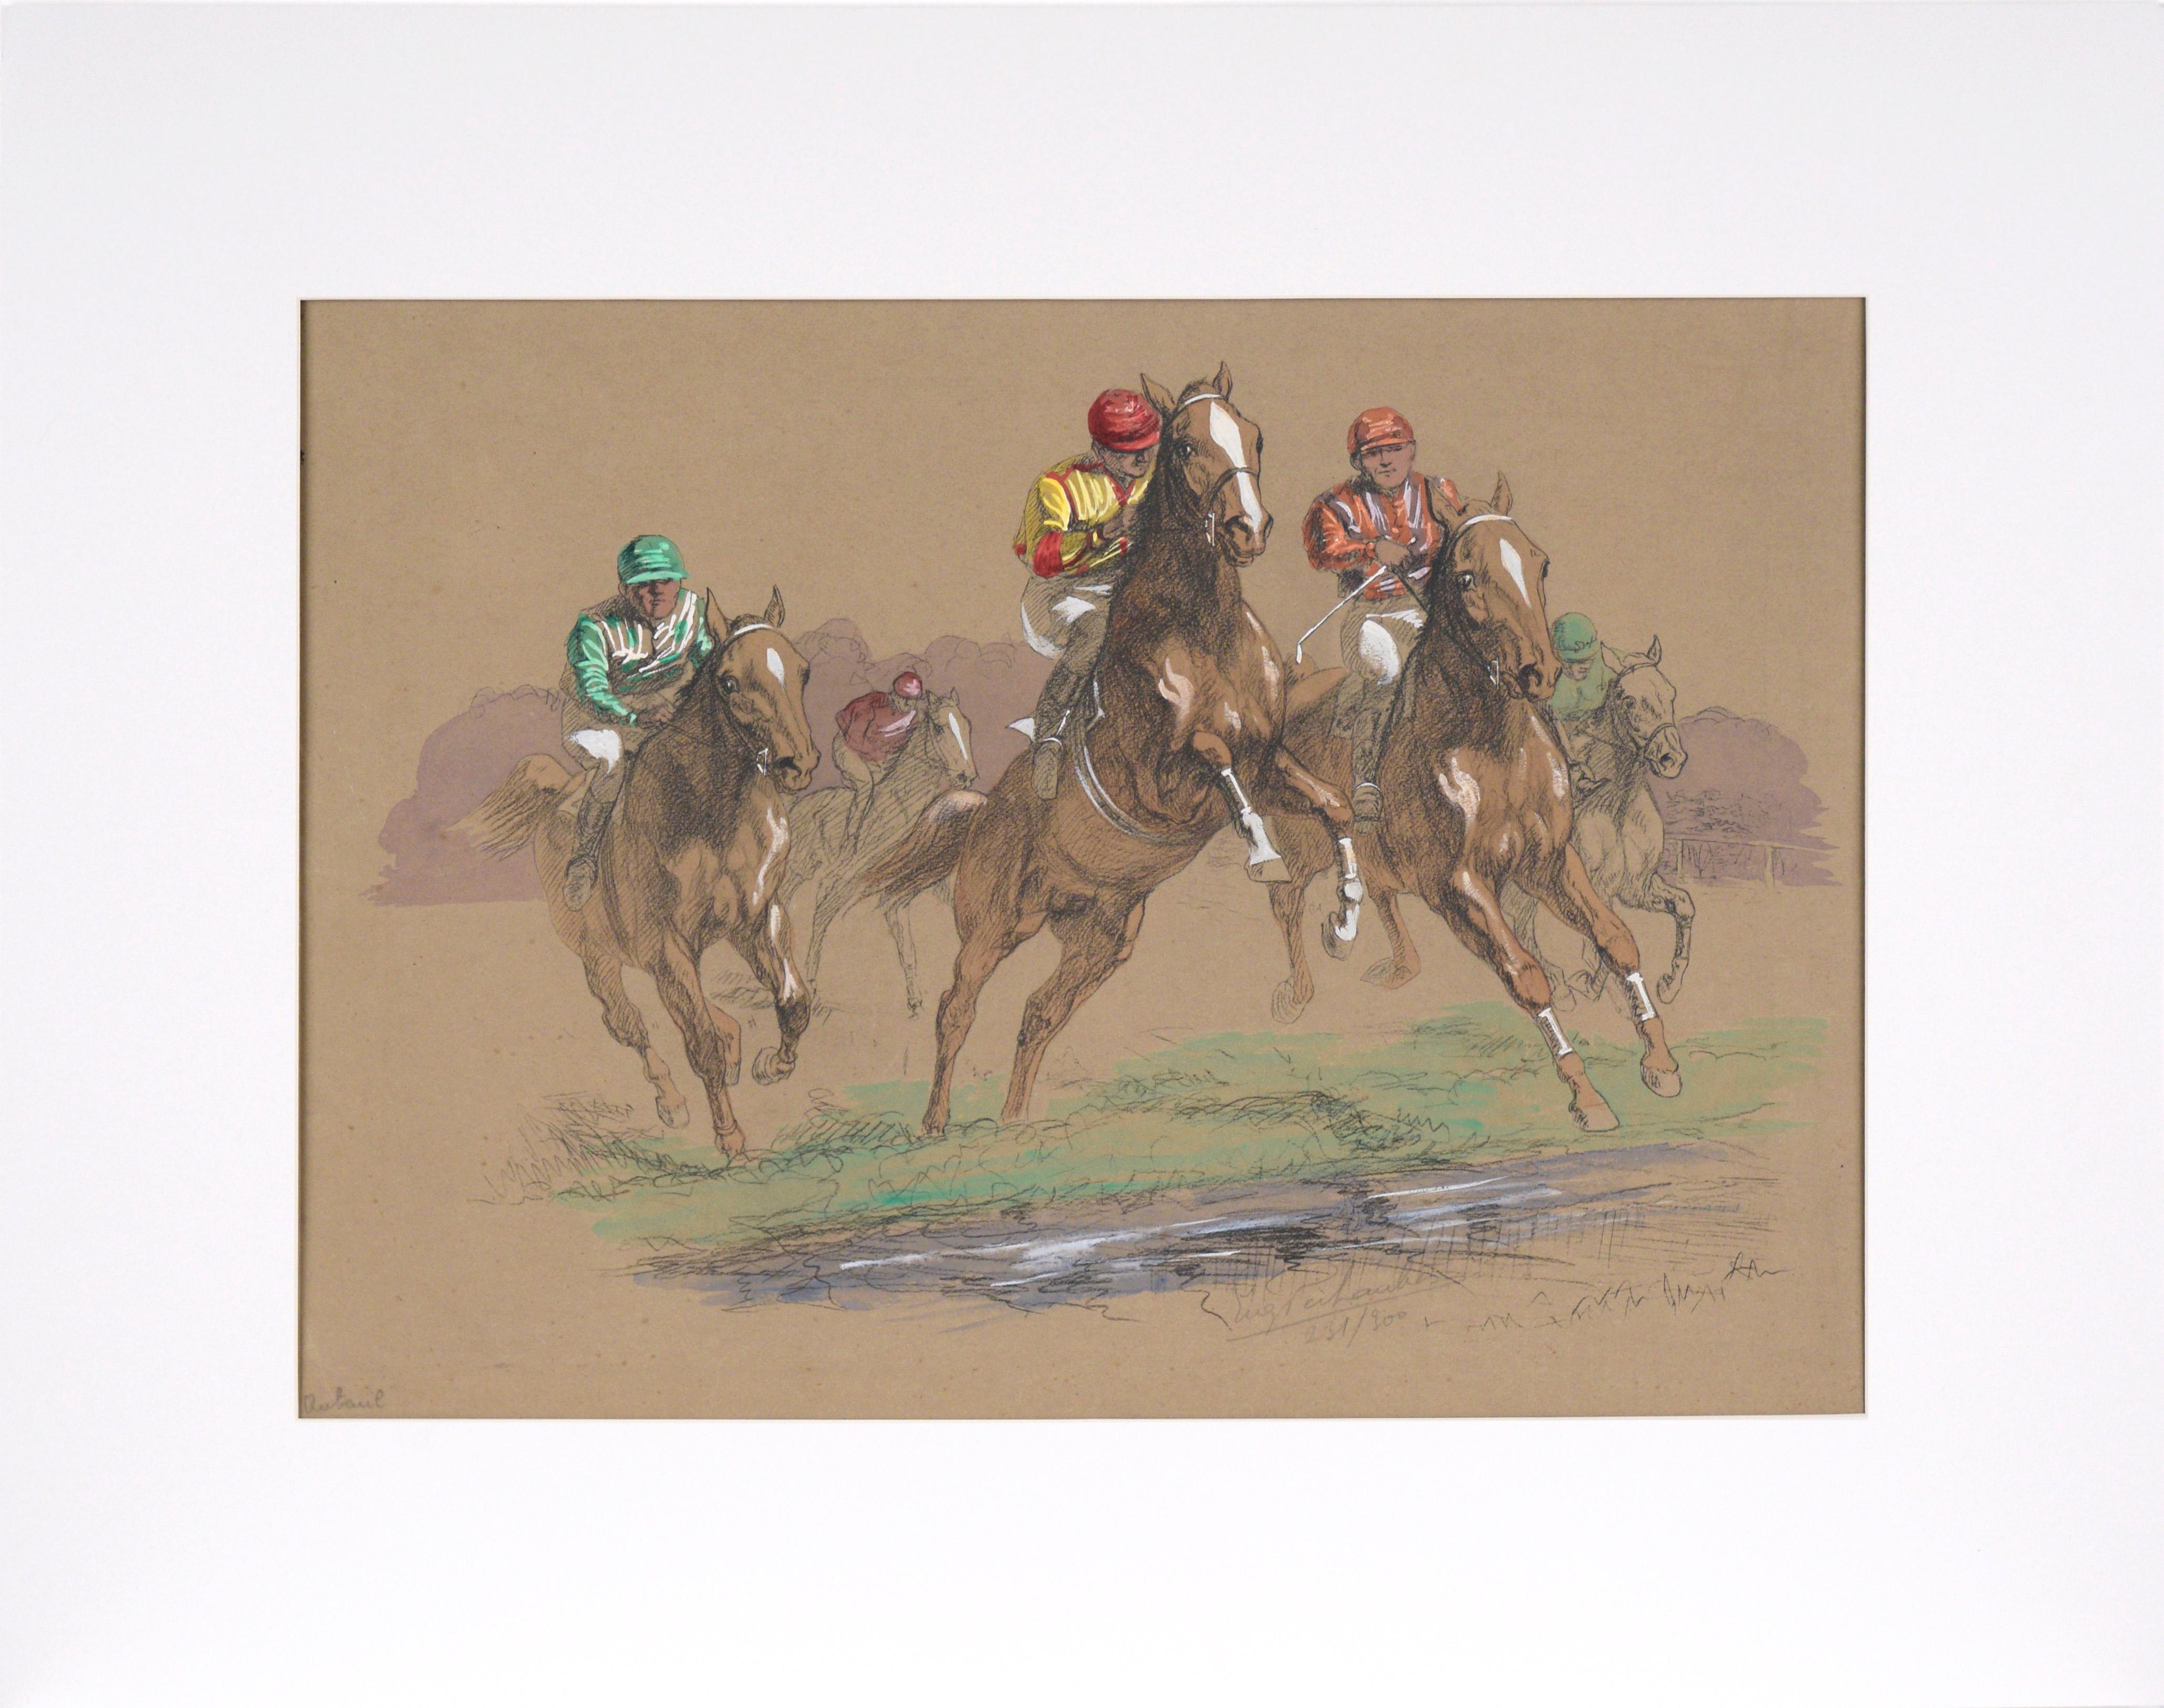 Eugene Pechaubes Animal Art - Horse Race - Hand Colored Lithograph in Gouache